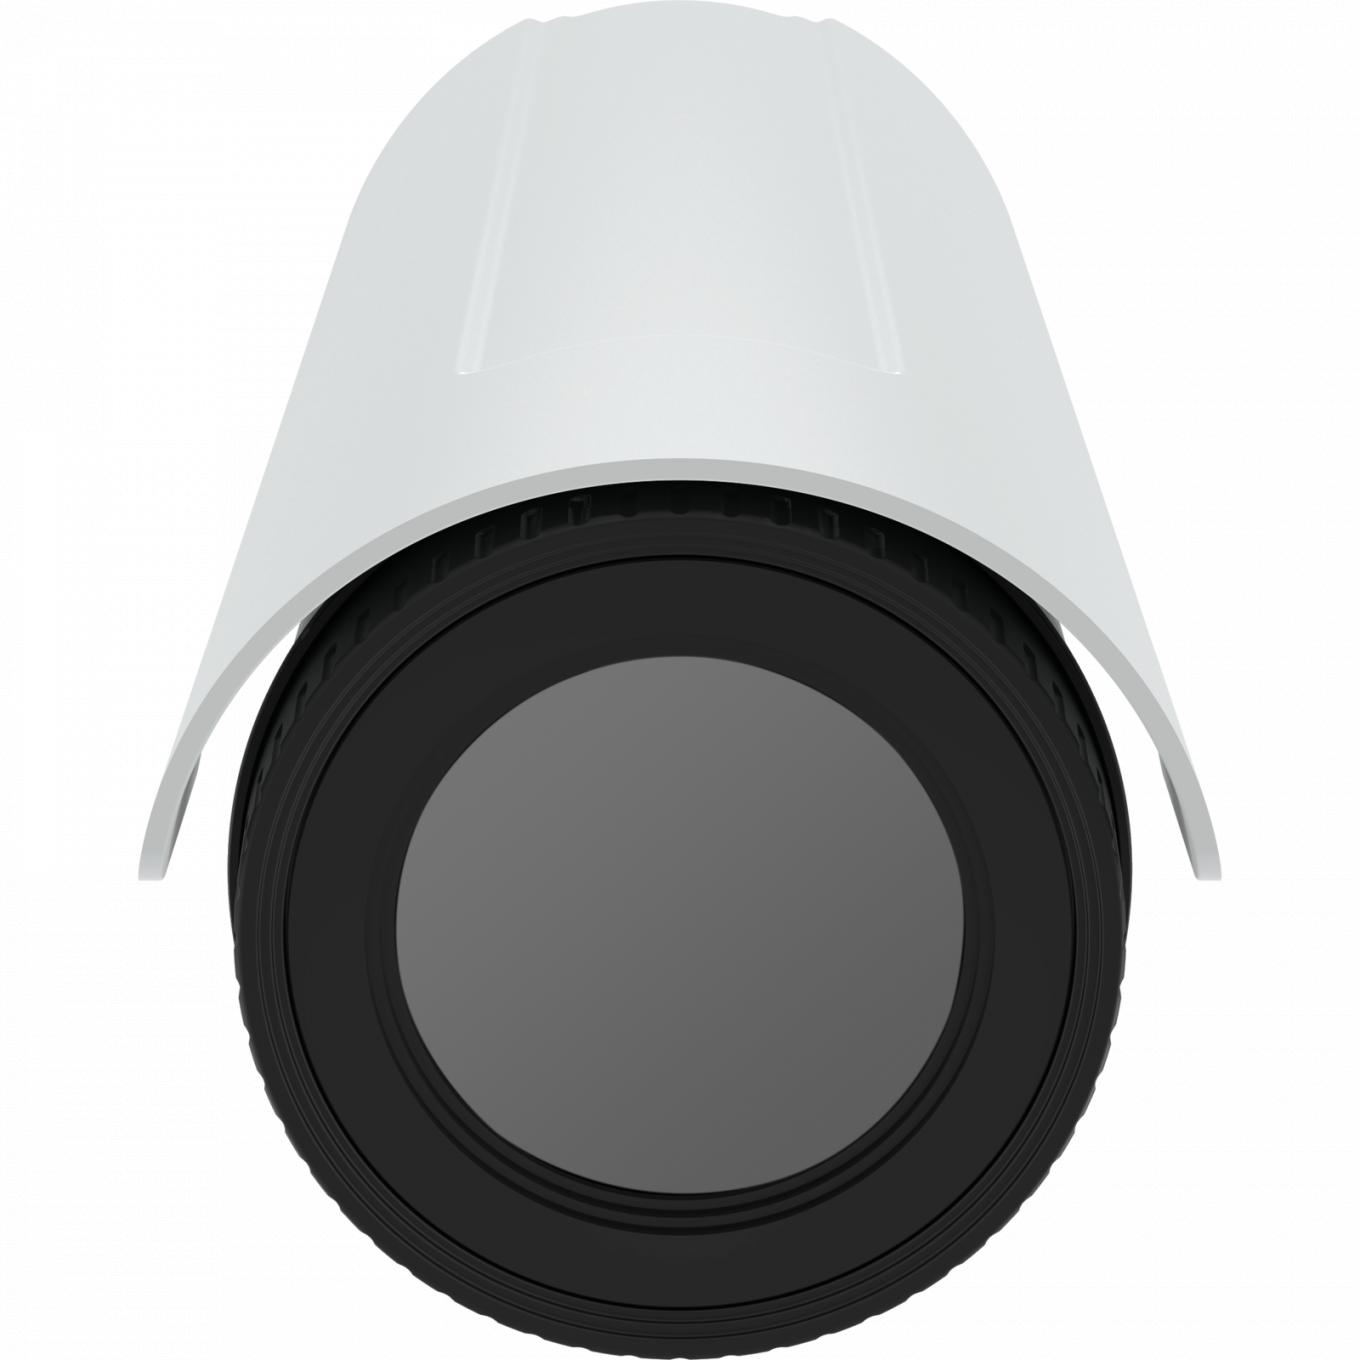 Front image of AXIS Q1942-E PT Mount Thermal Network Camera.